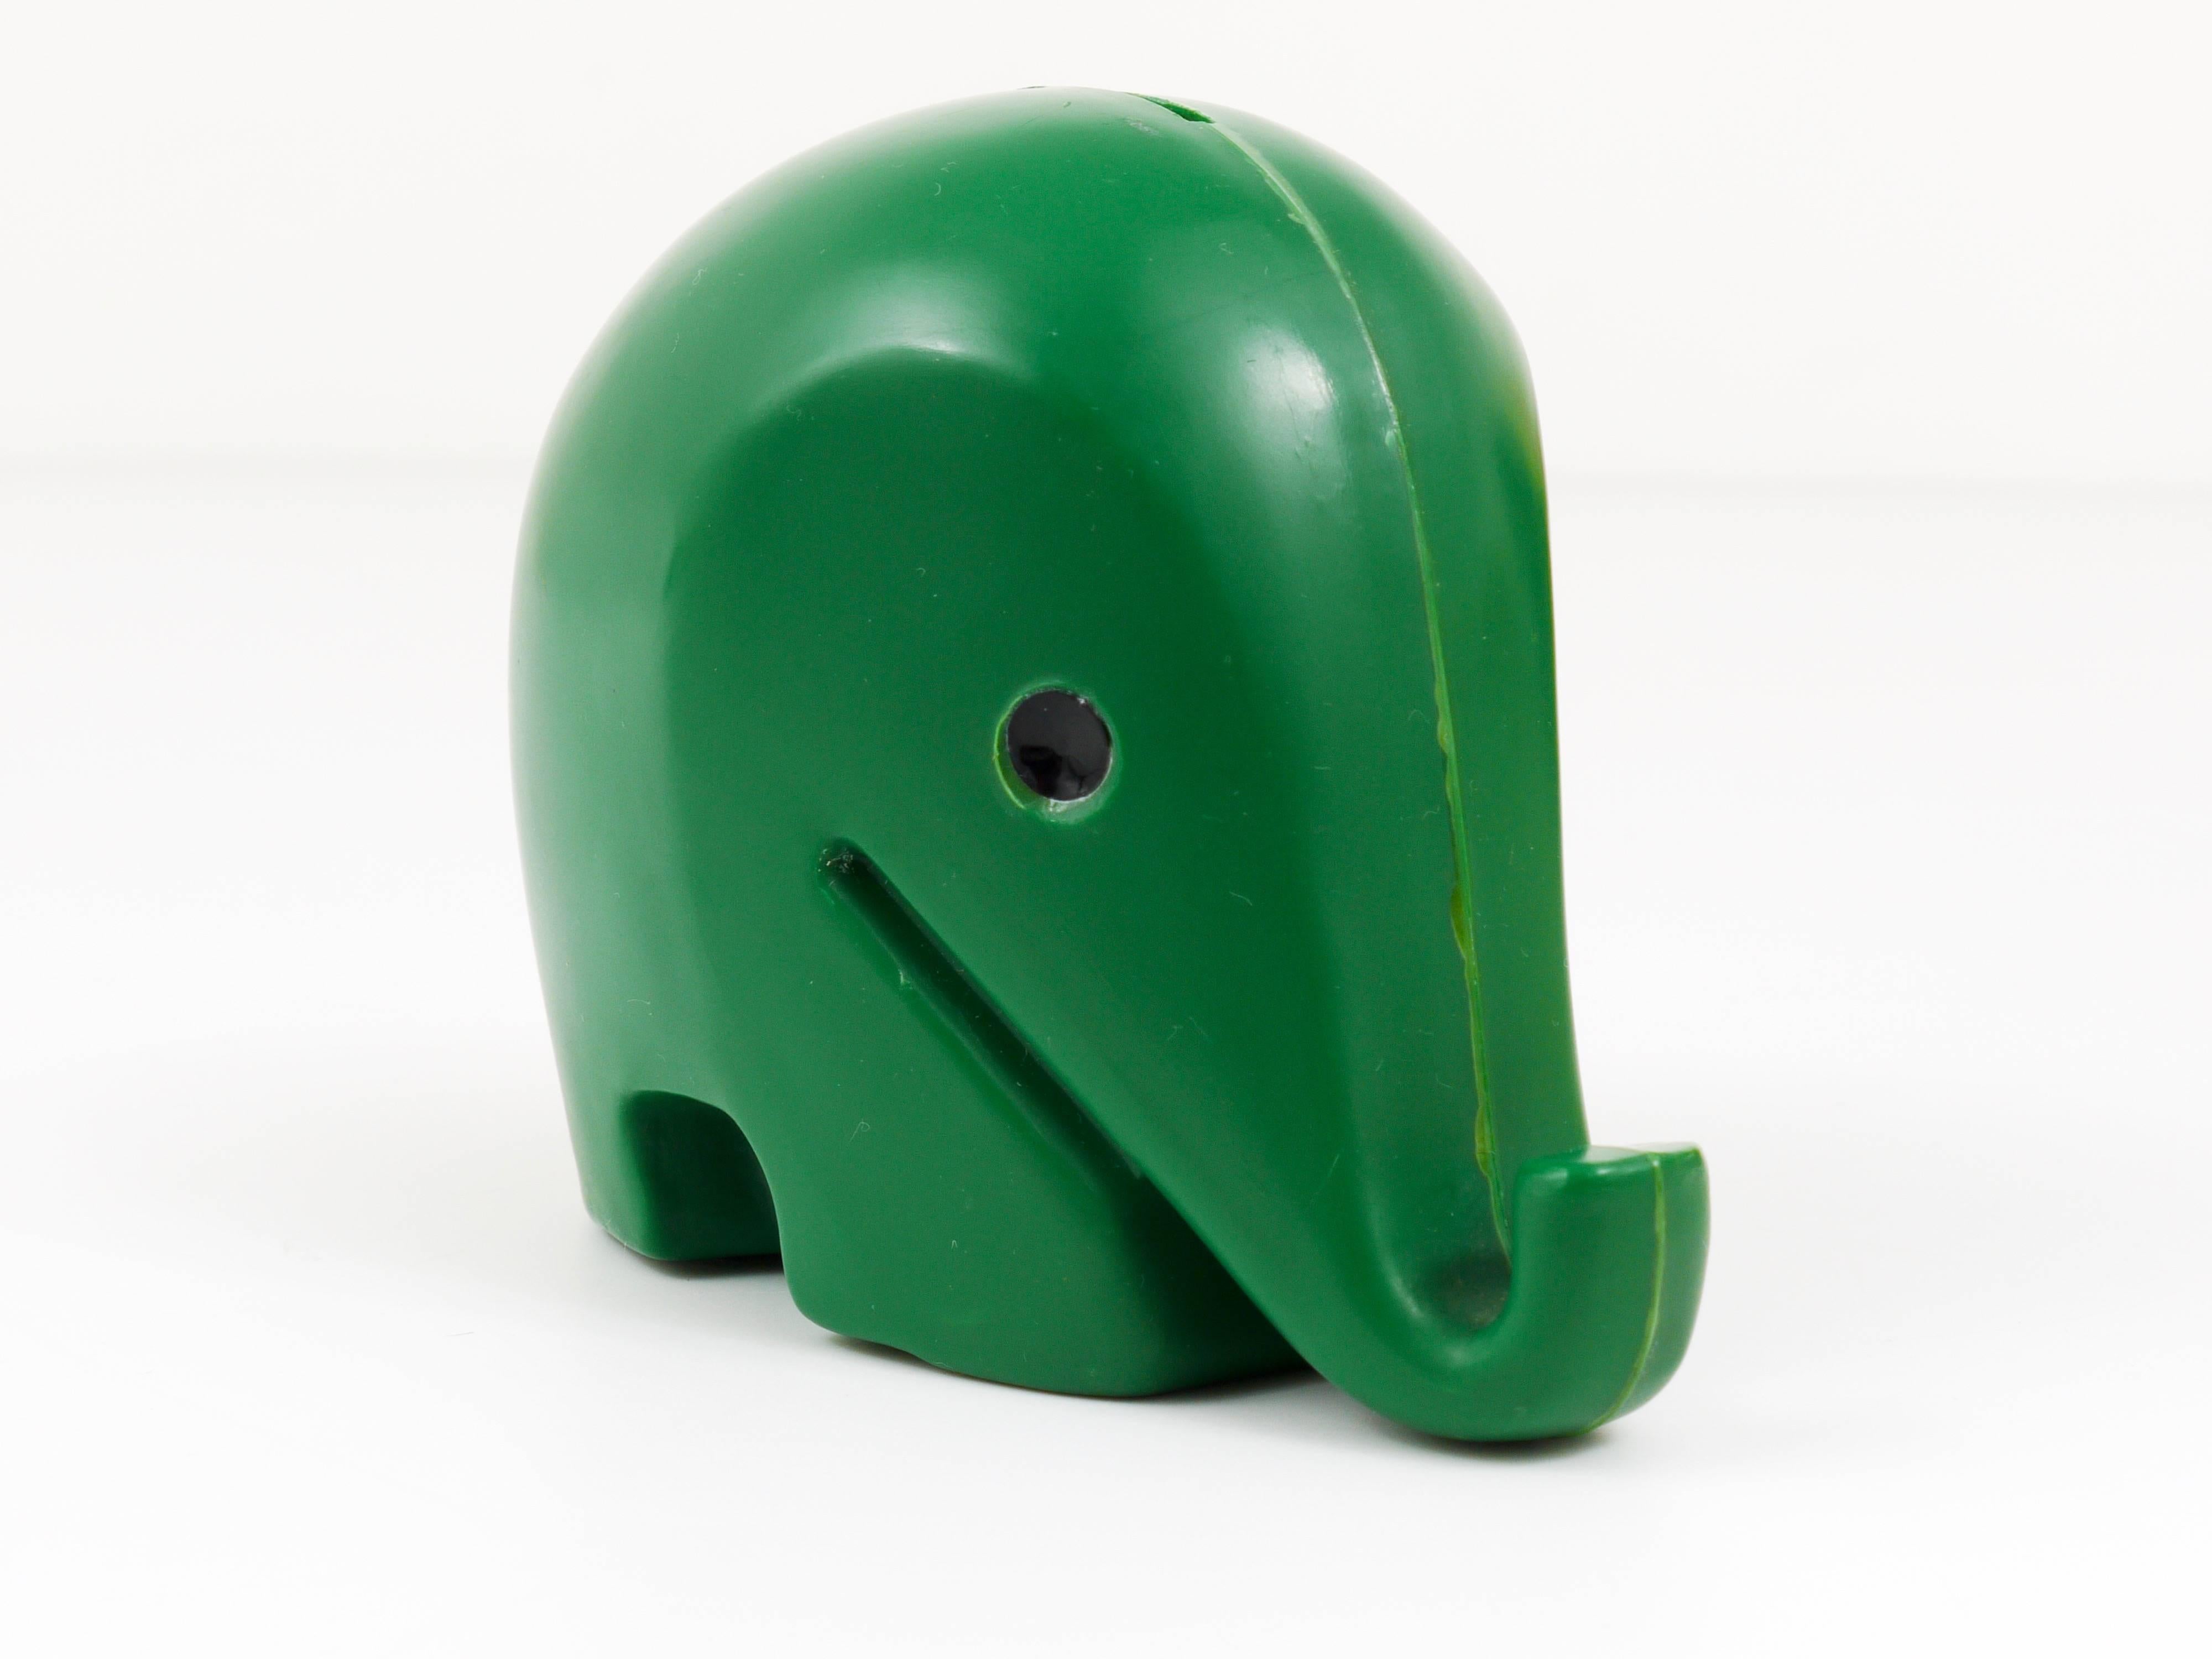  Luigi Colani Drumbo Green Elephant Money Bank for Dresdner Bank, 1970s In Good Condition For Sale In Vienna, AT